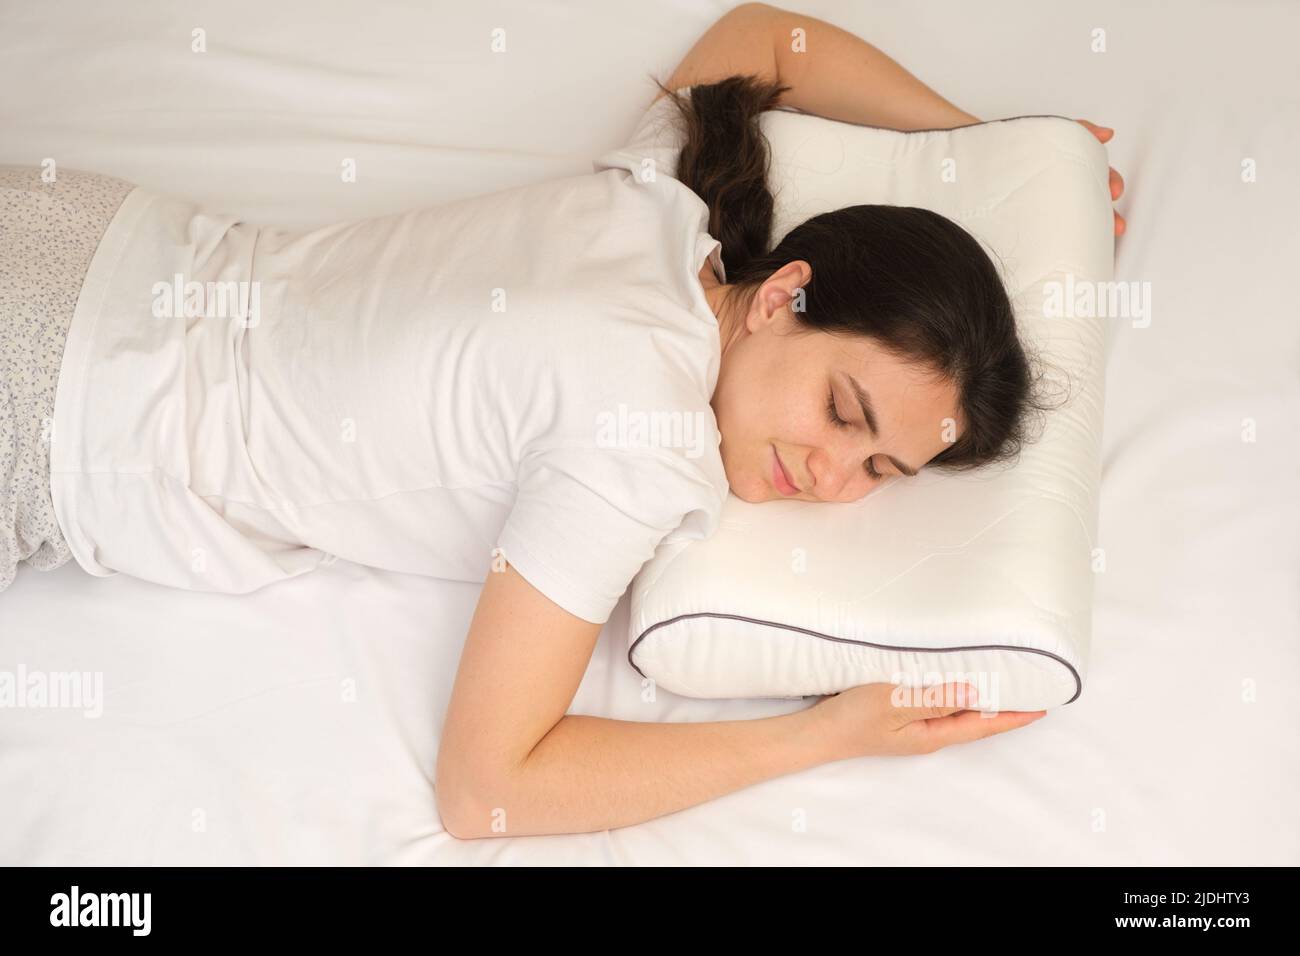 https://c8.alamy.com/comp/2JDHTY3/a-woman-sleeps-on-her-stomach-on-an-orthopedic-pillow-made-of-memory-foam-2JDHTY3.jpg